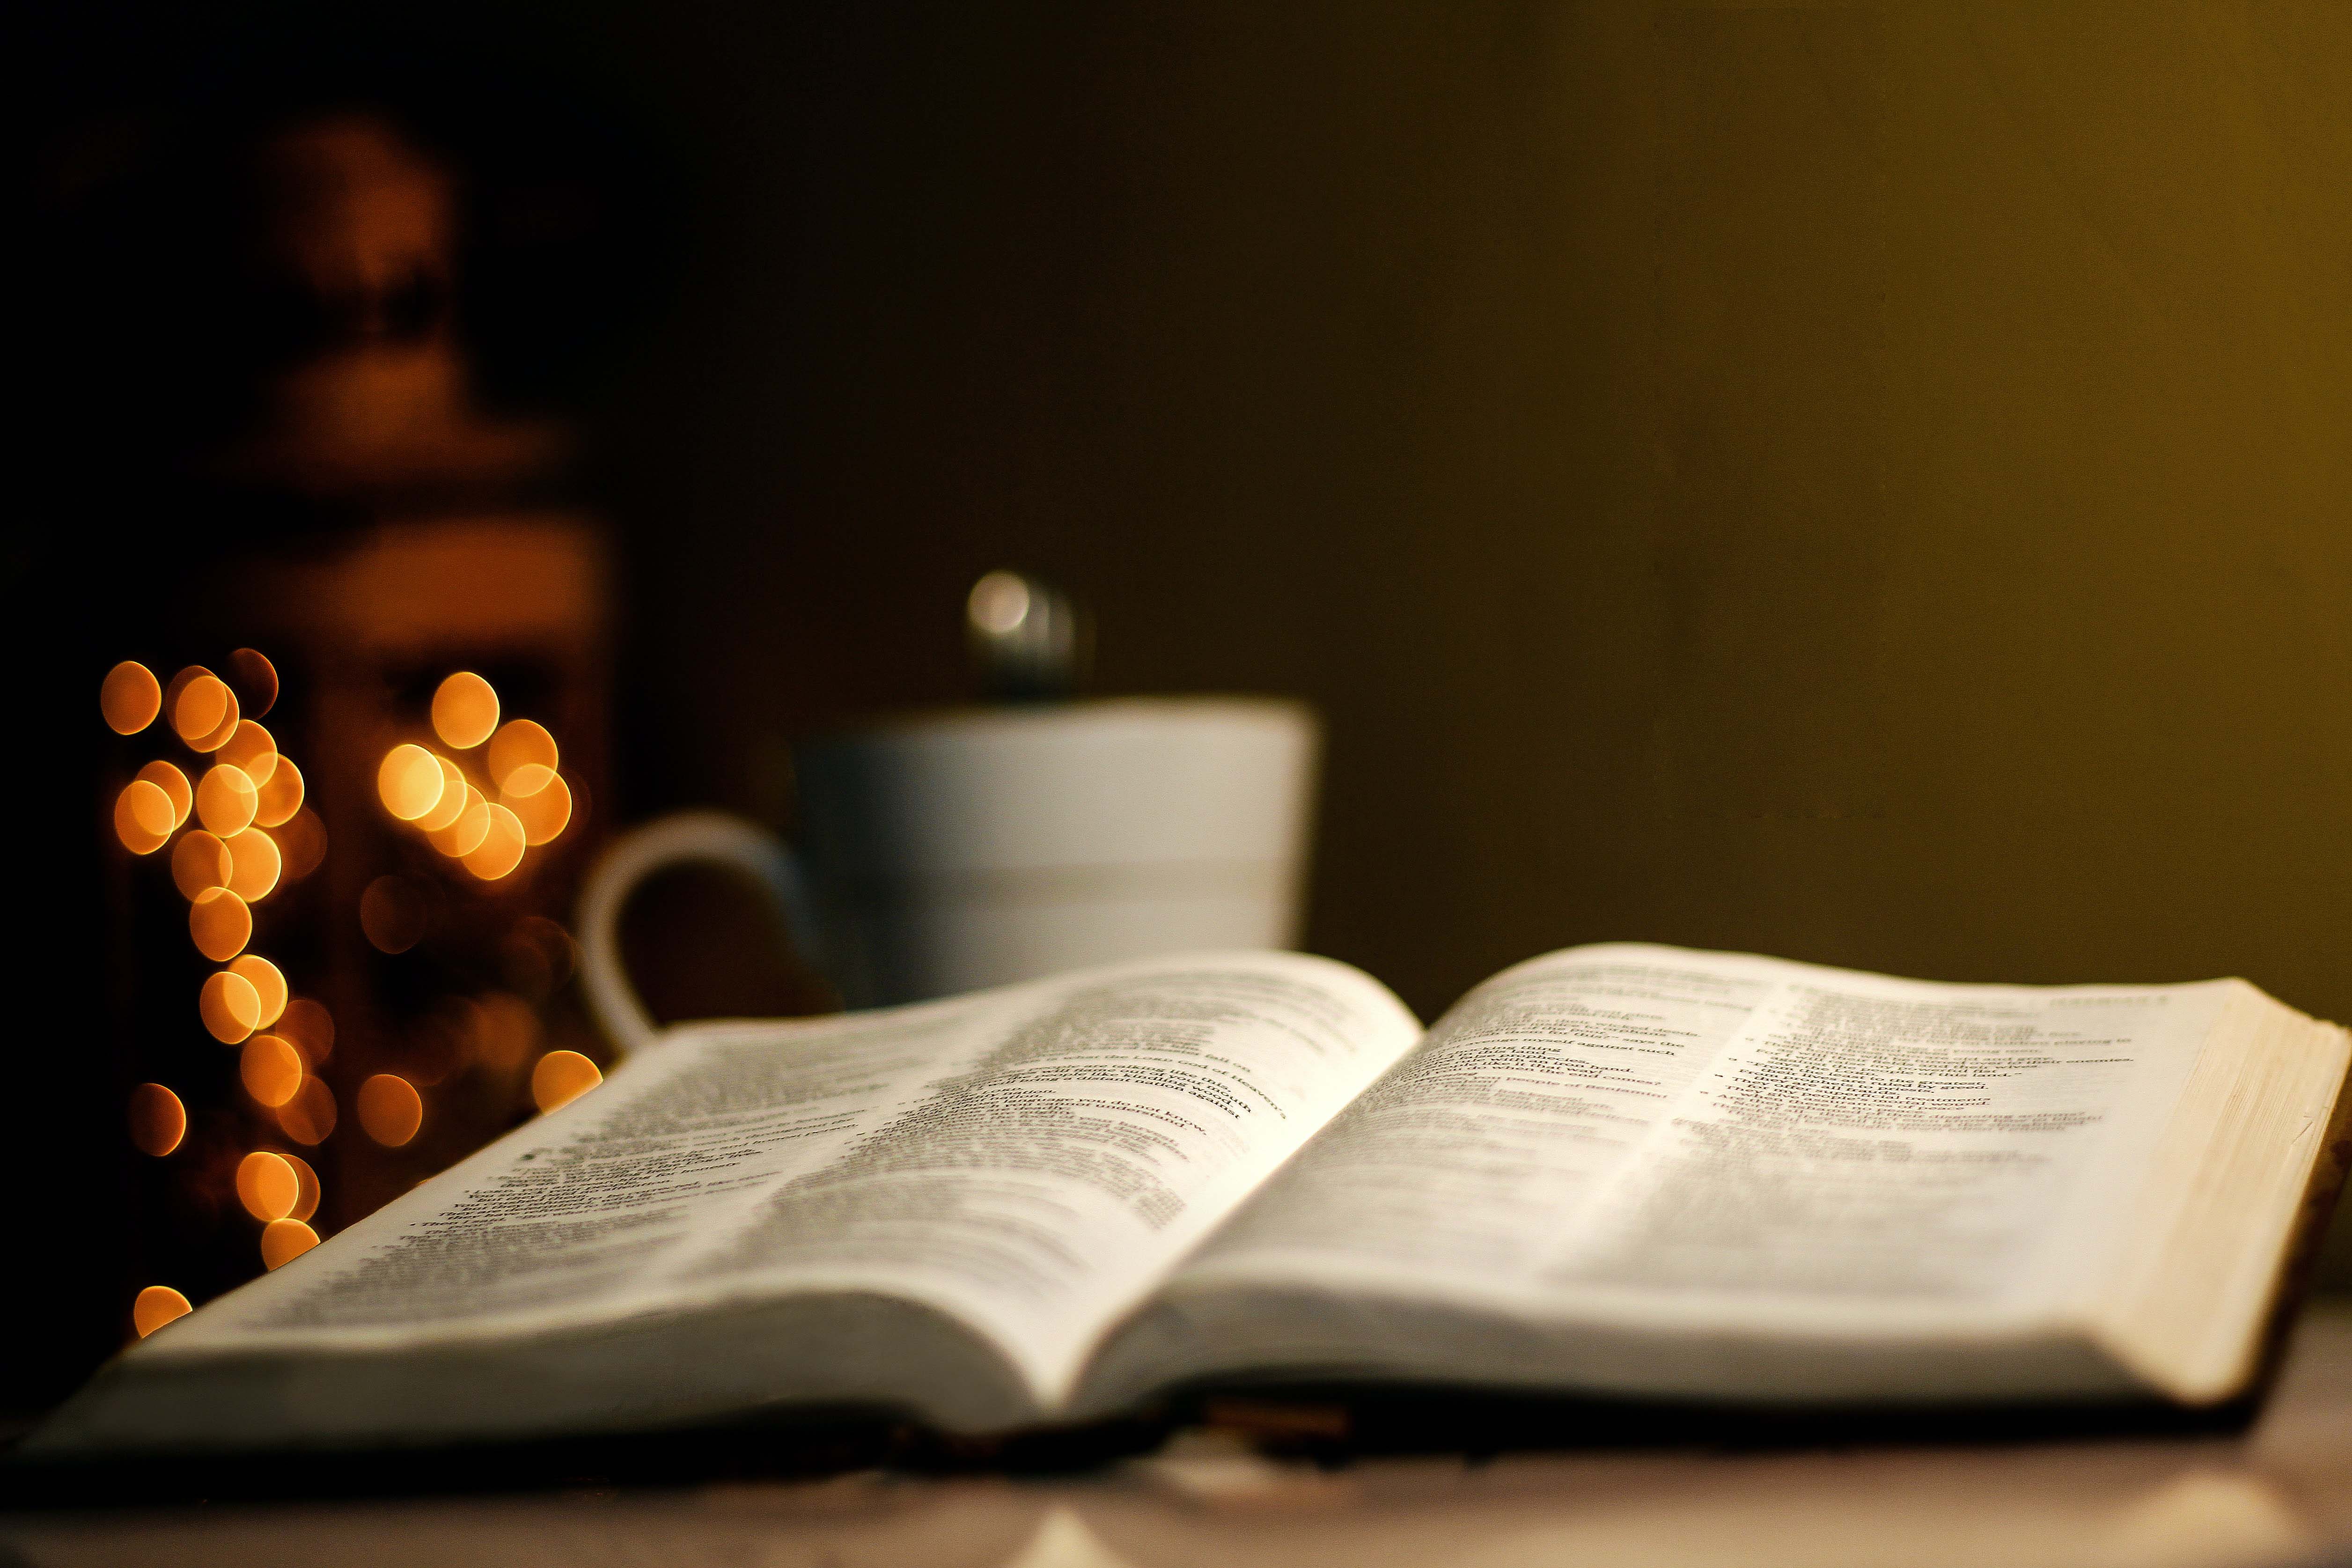 The image shows a book laying open on a table and the view is as if you're looking at it from table level. Behind the book is a coffee mug and holiday lights, both out of focus, giving the photo a soft glow.